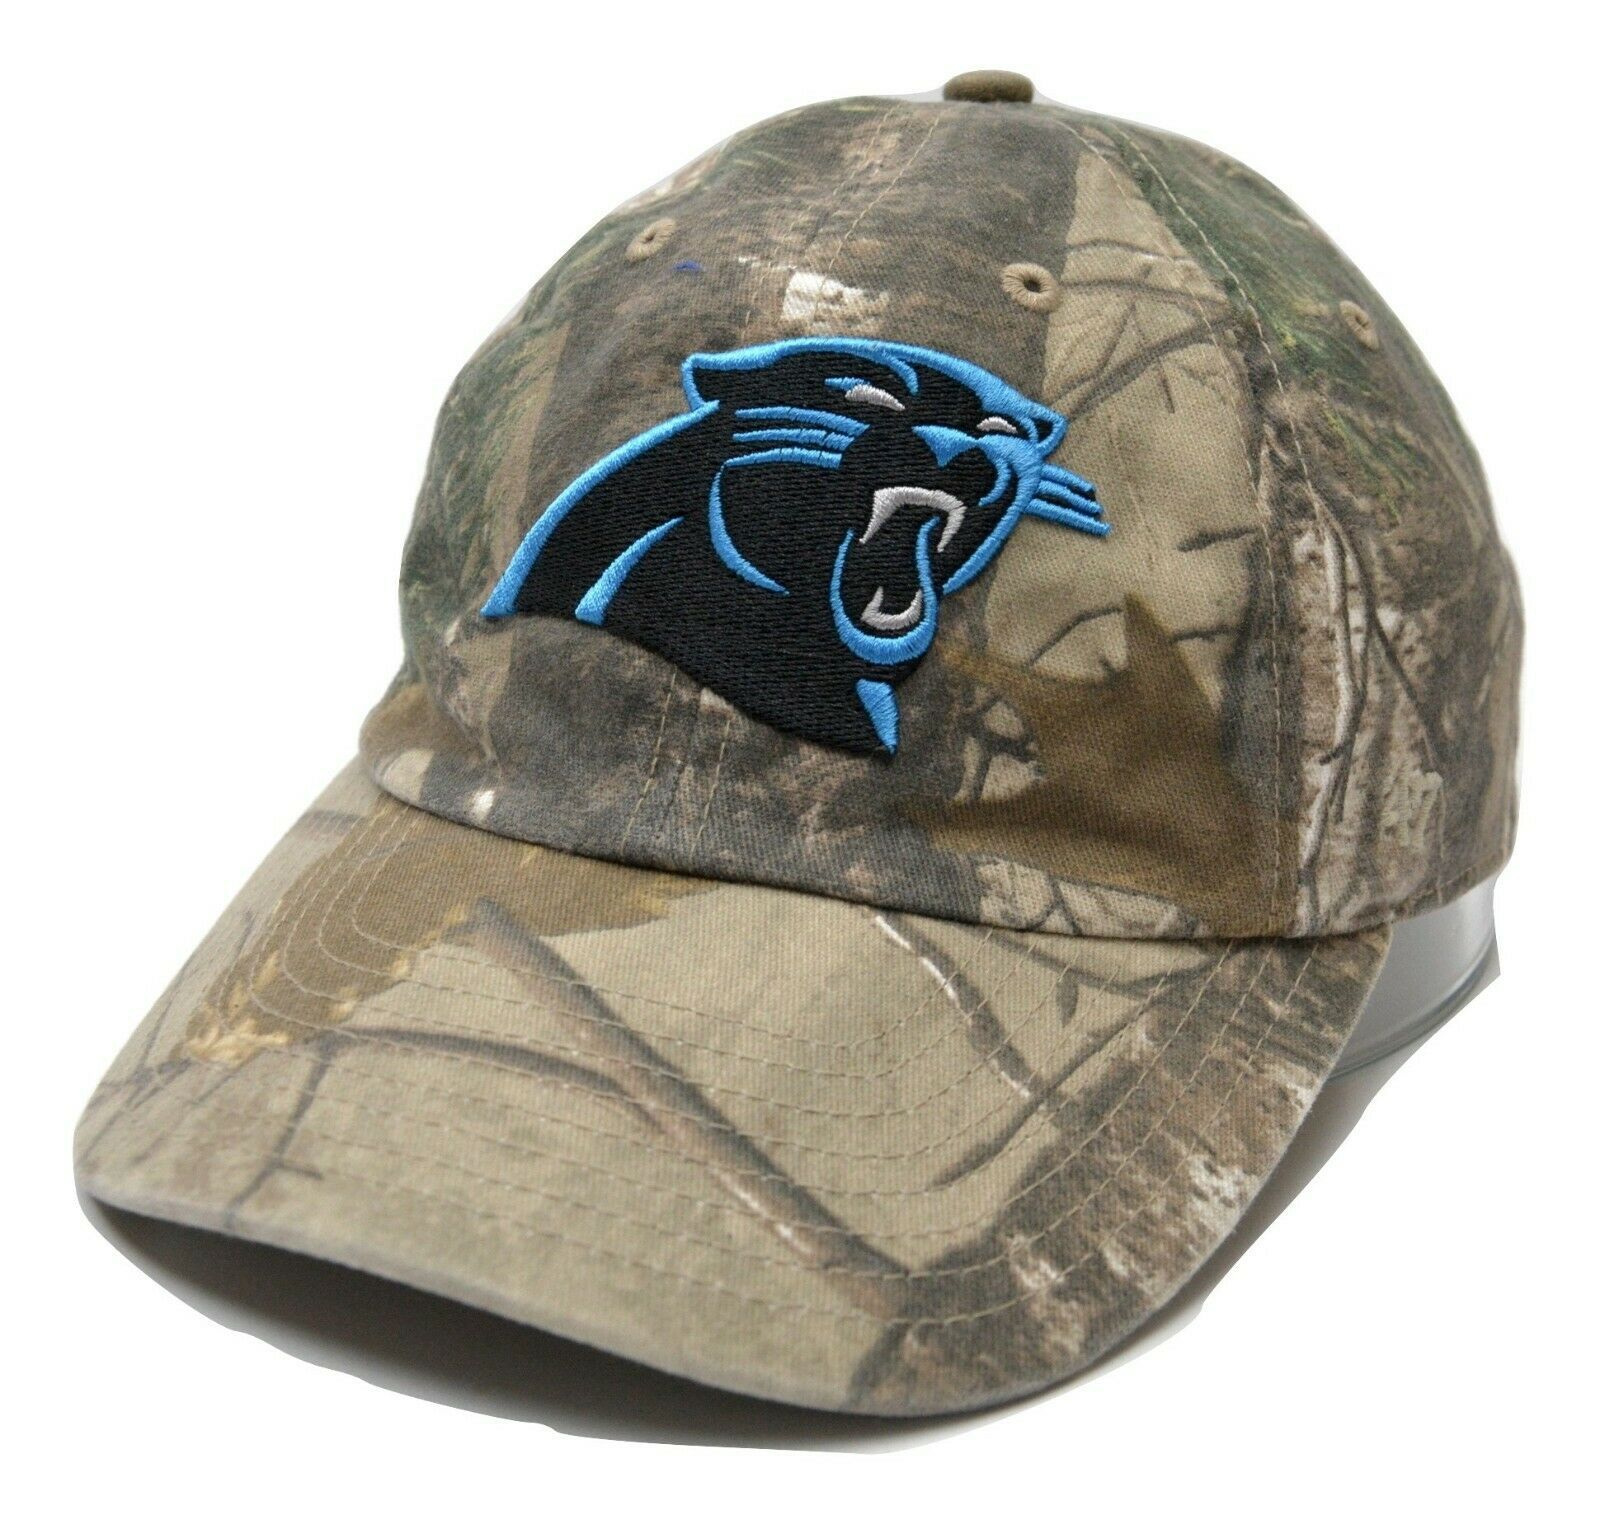 Primary image for '47 Carolina Panthers NFL Men's Realtree Camouflage Clean Up Adjustable Cap